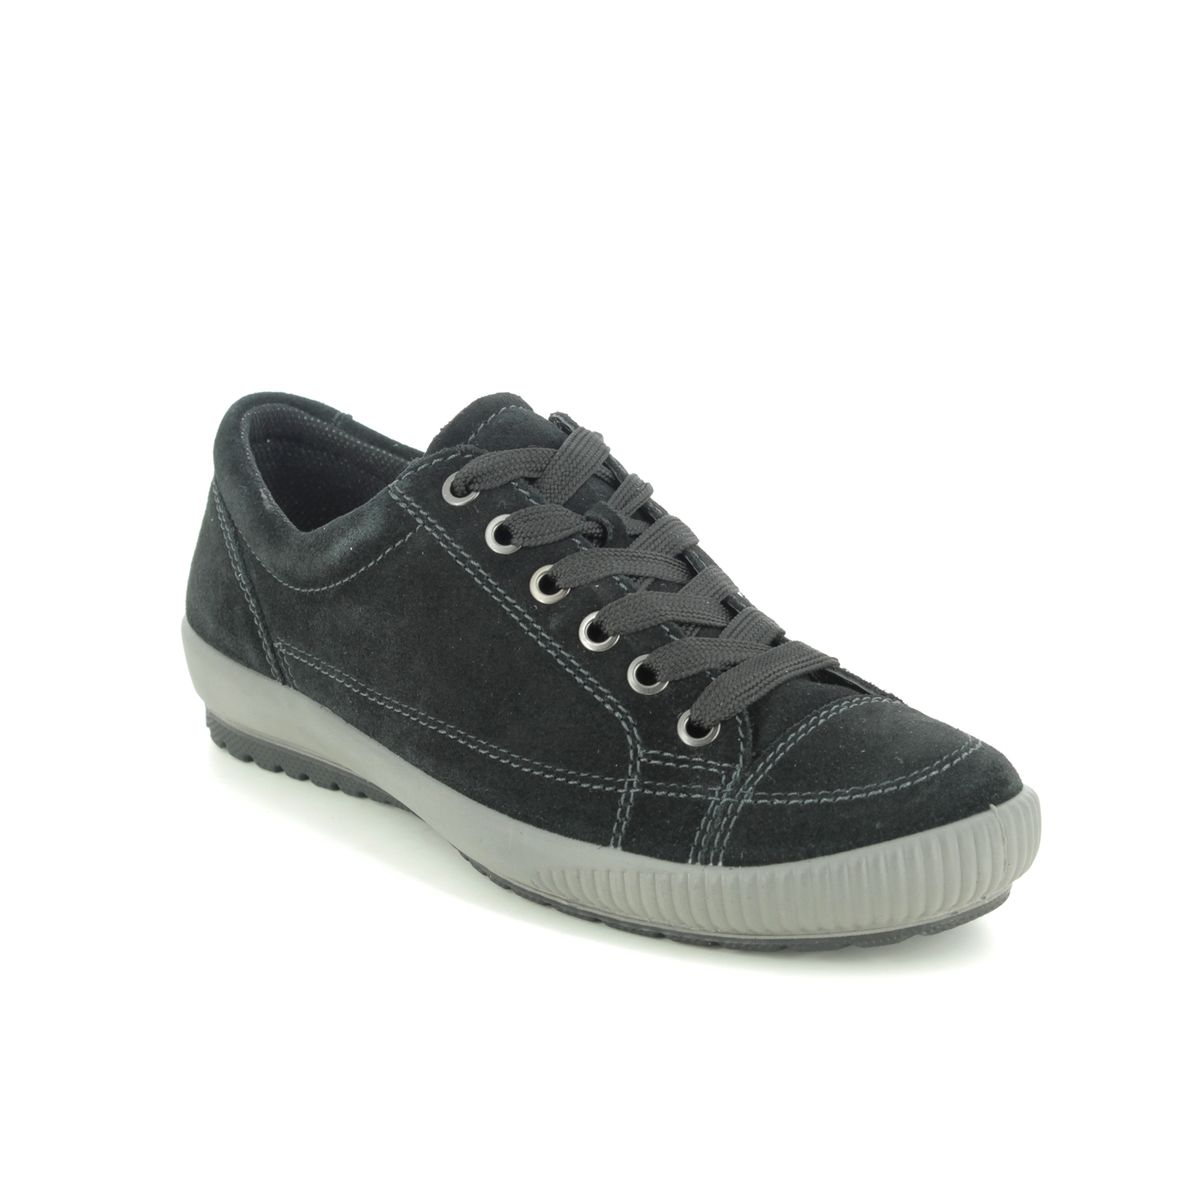 Legero Tanaro Stitch Black Suede Womens Lacing Shoes 0800820-0000 In Size 7.5 In Plain Black Suede